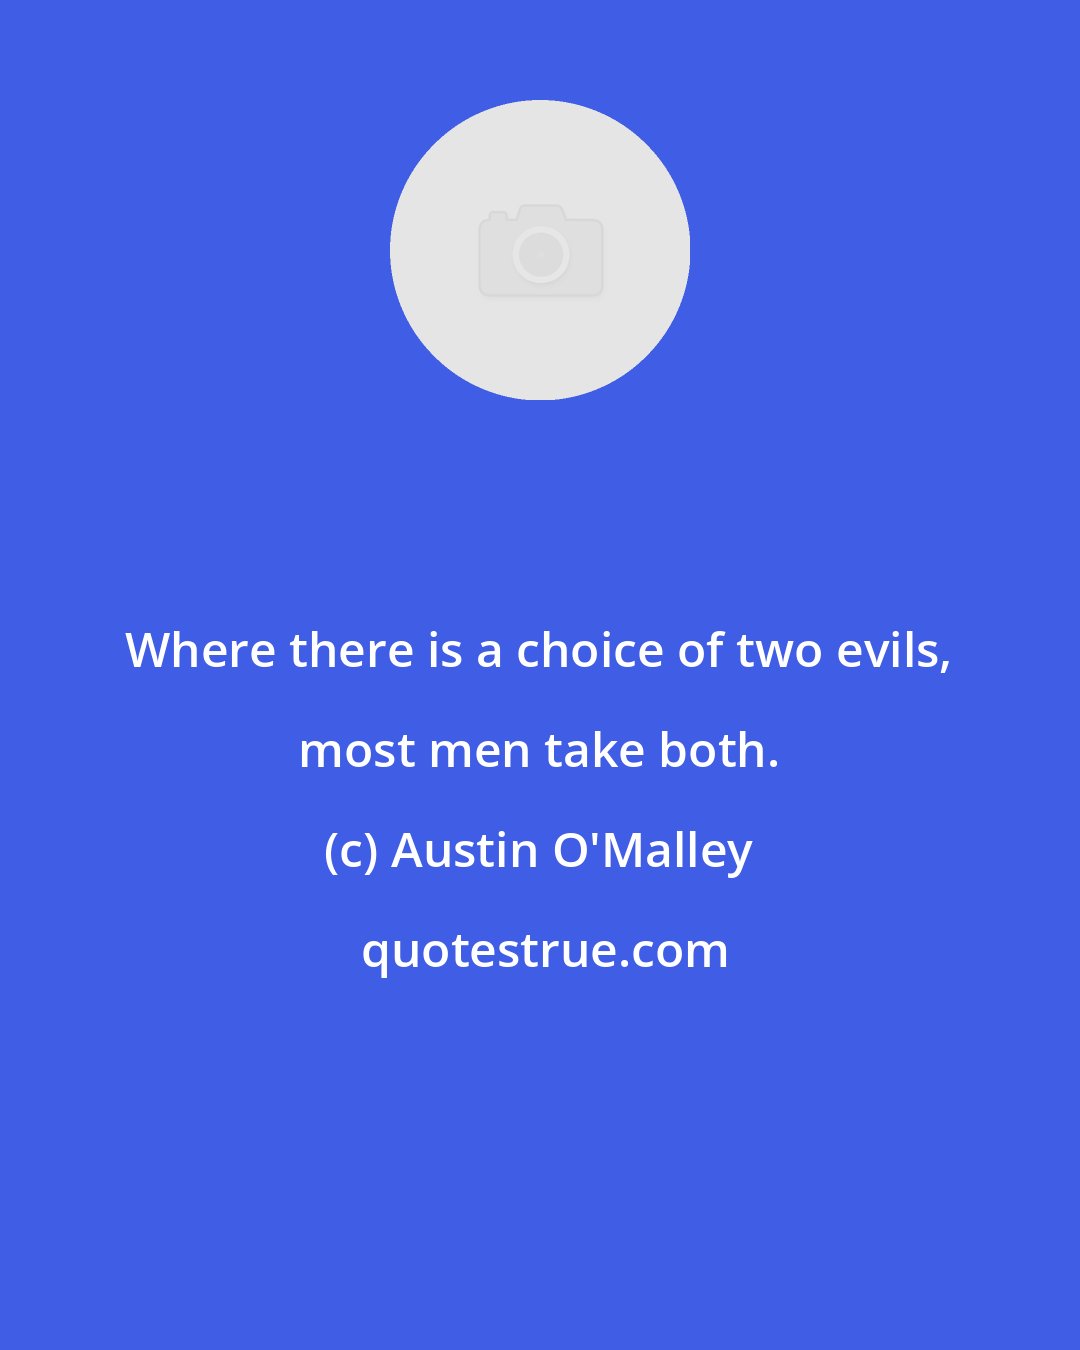 Austin O'Malley: Where there is a choice of two evils, most men take both.